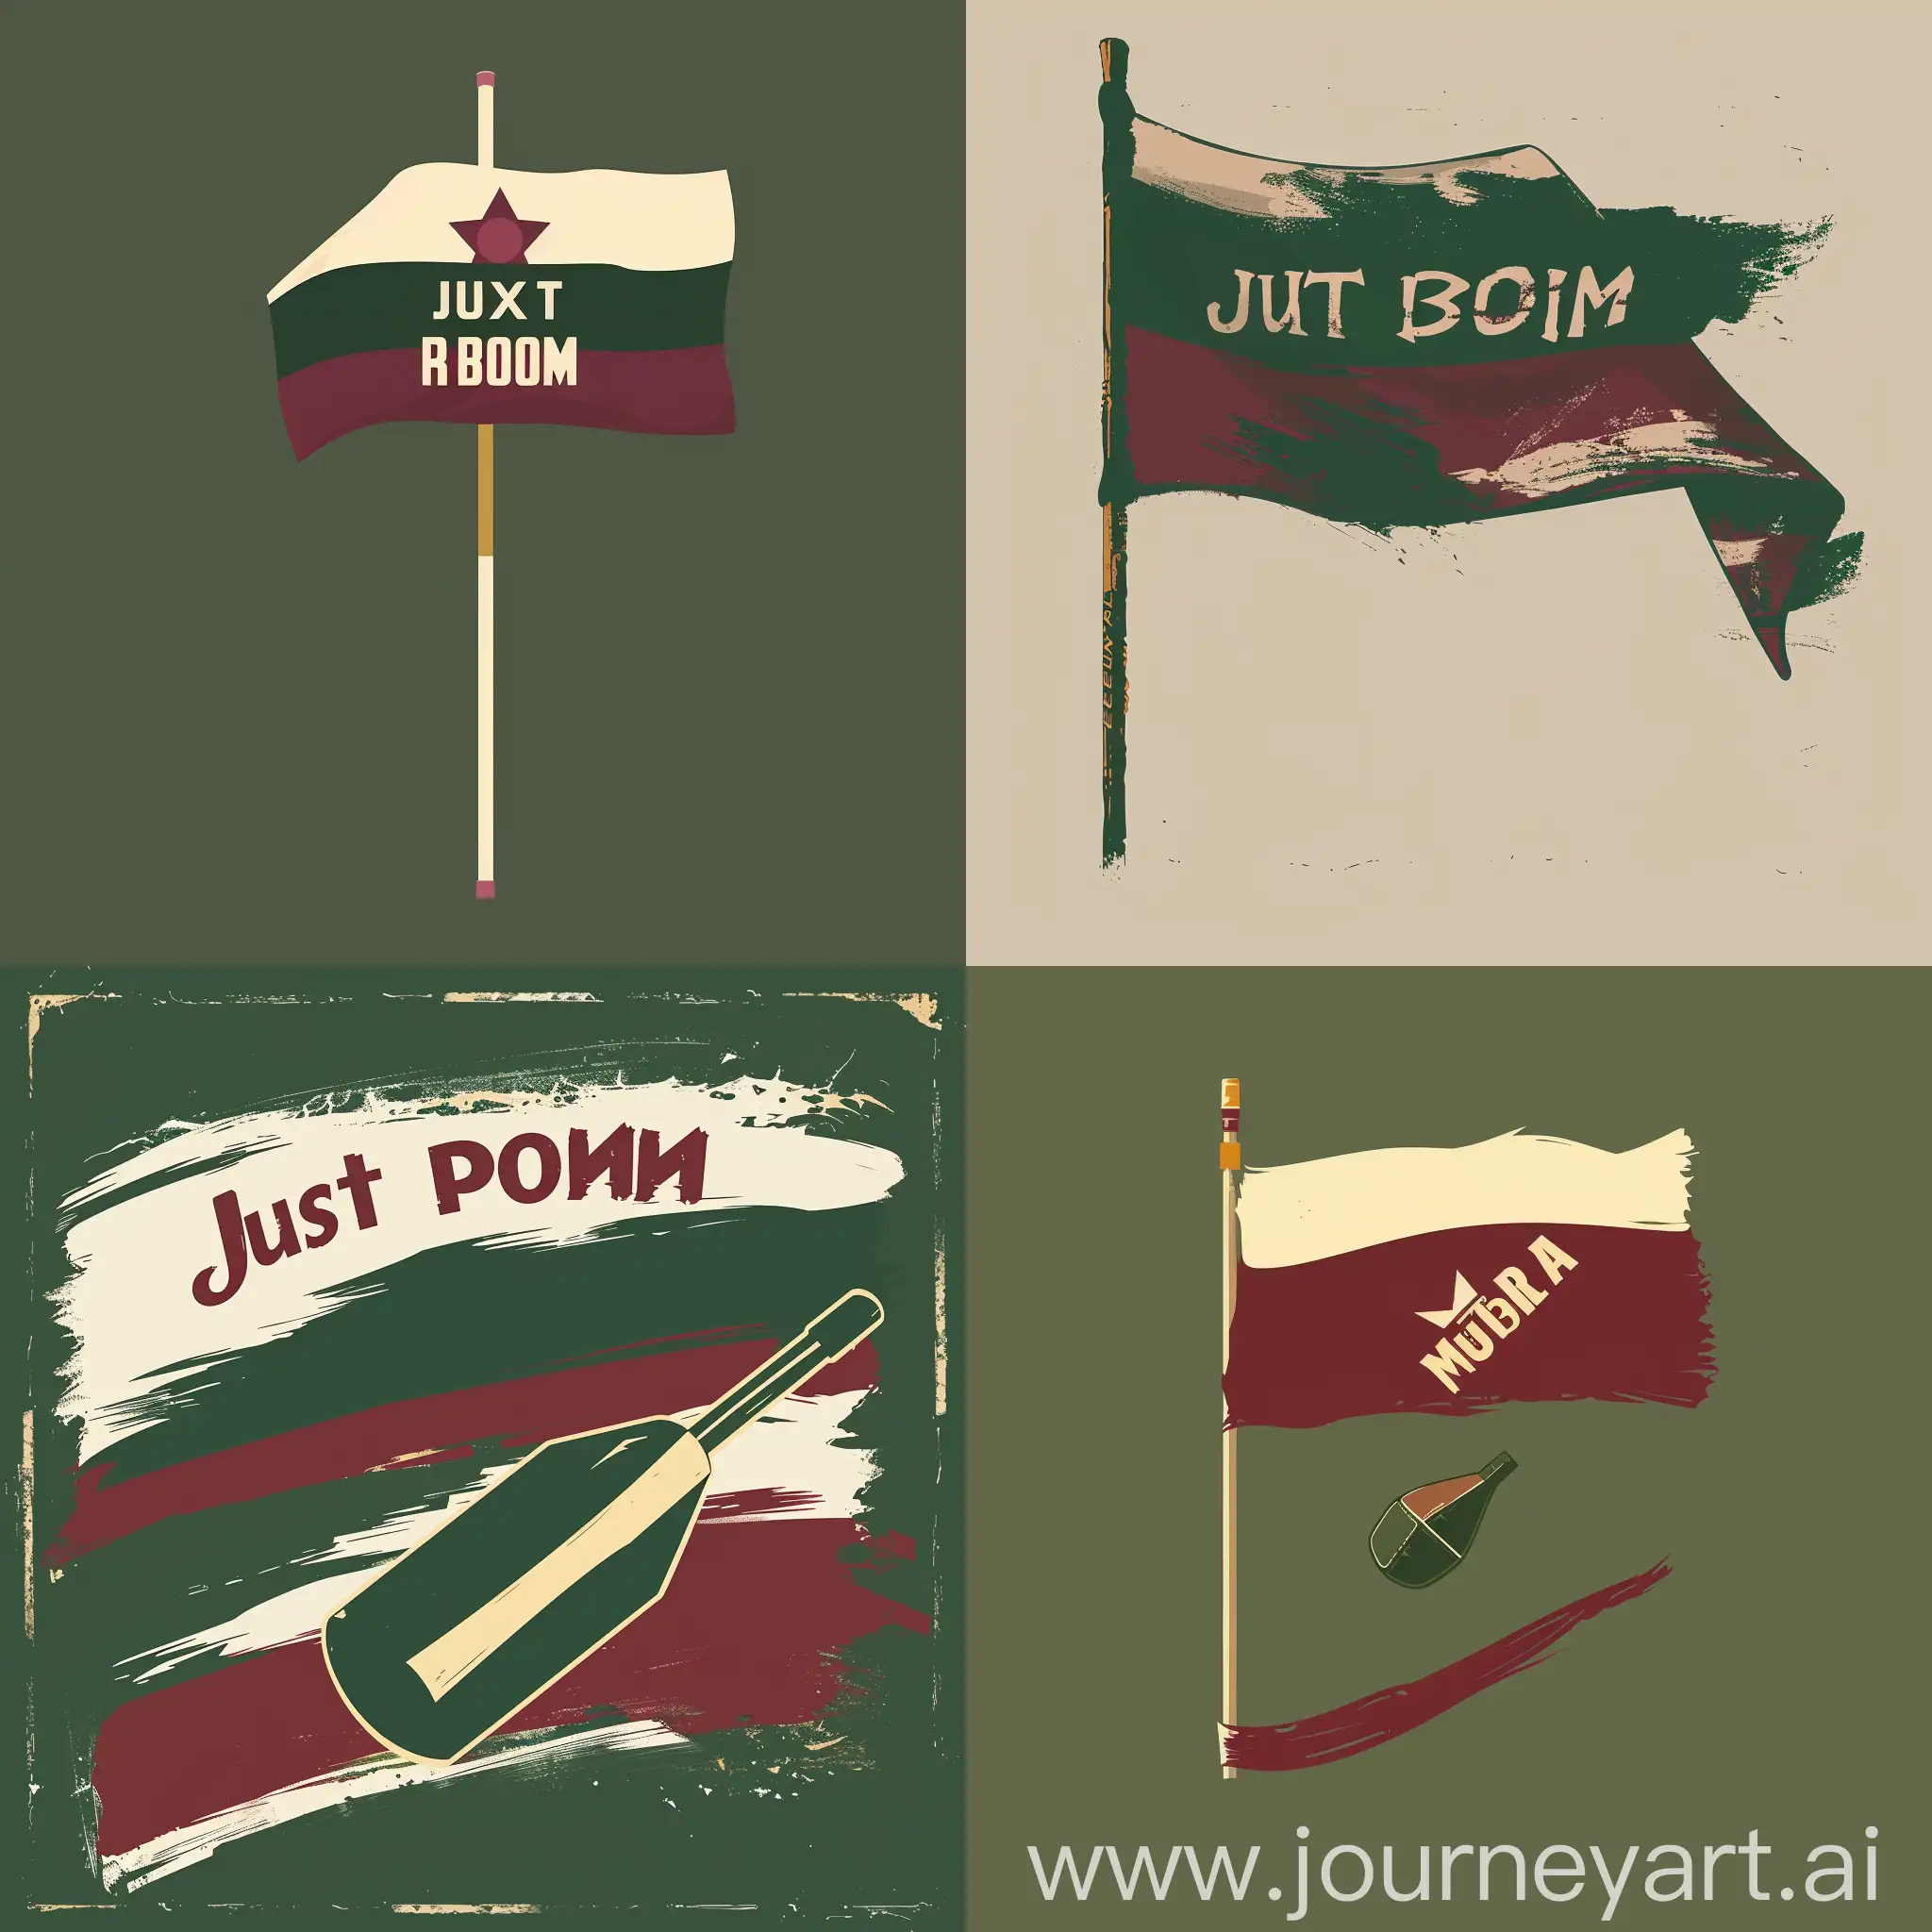 The flag of the team is "Just a bomb". Colors: burgundy, cream, forest green. Retro Soviet style, minimalism. Something in the style of the Minnesota Wild club